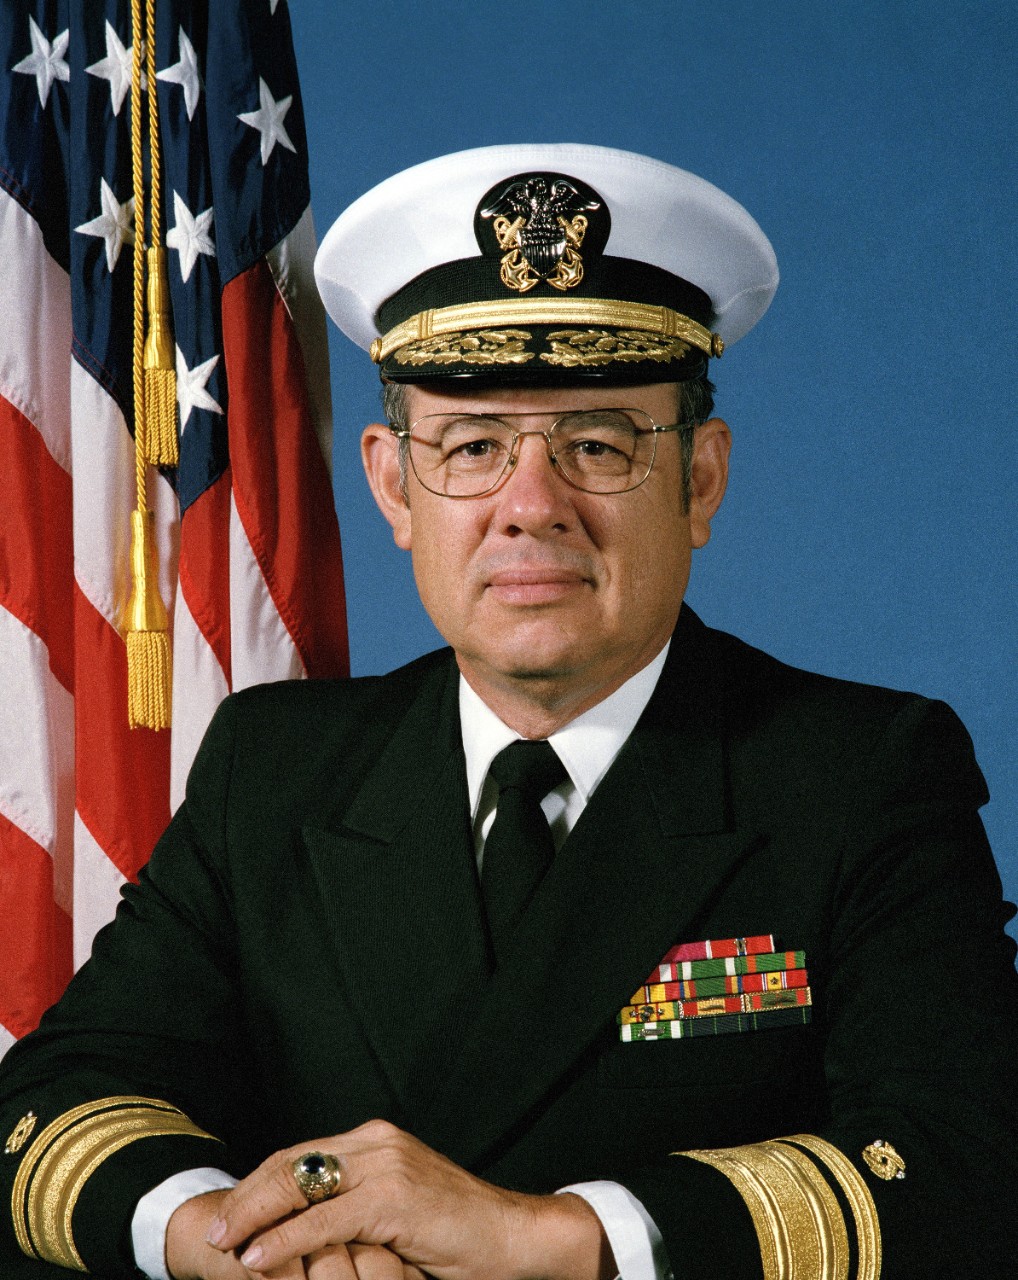 330-CFD-DN-SC-87-11011:   Rear Admiral Benjamin F. Montoya, CEC, USN, 1987.   Official portrait.  Official U.S. Navy photograph, now in the collections of the National Archives.  